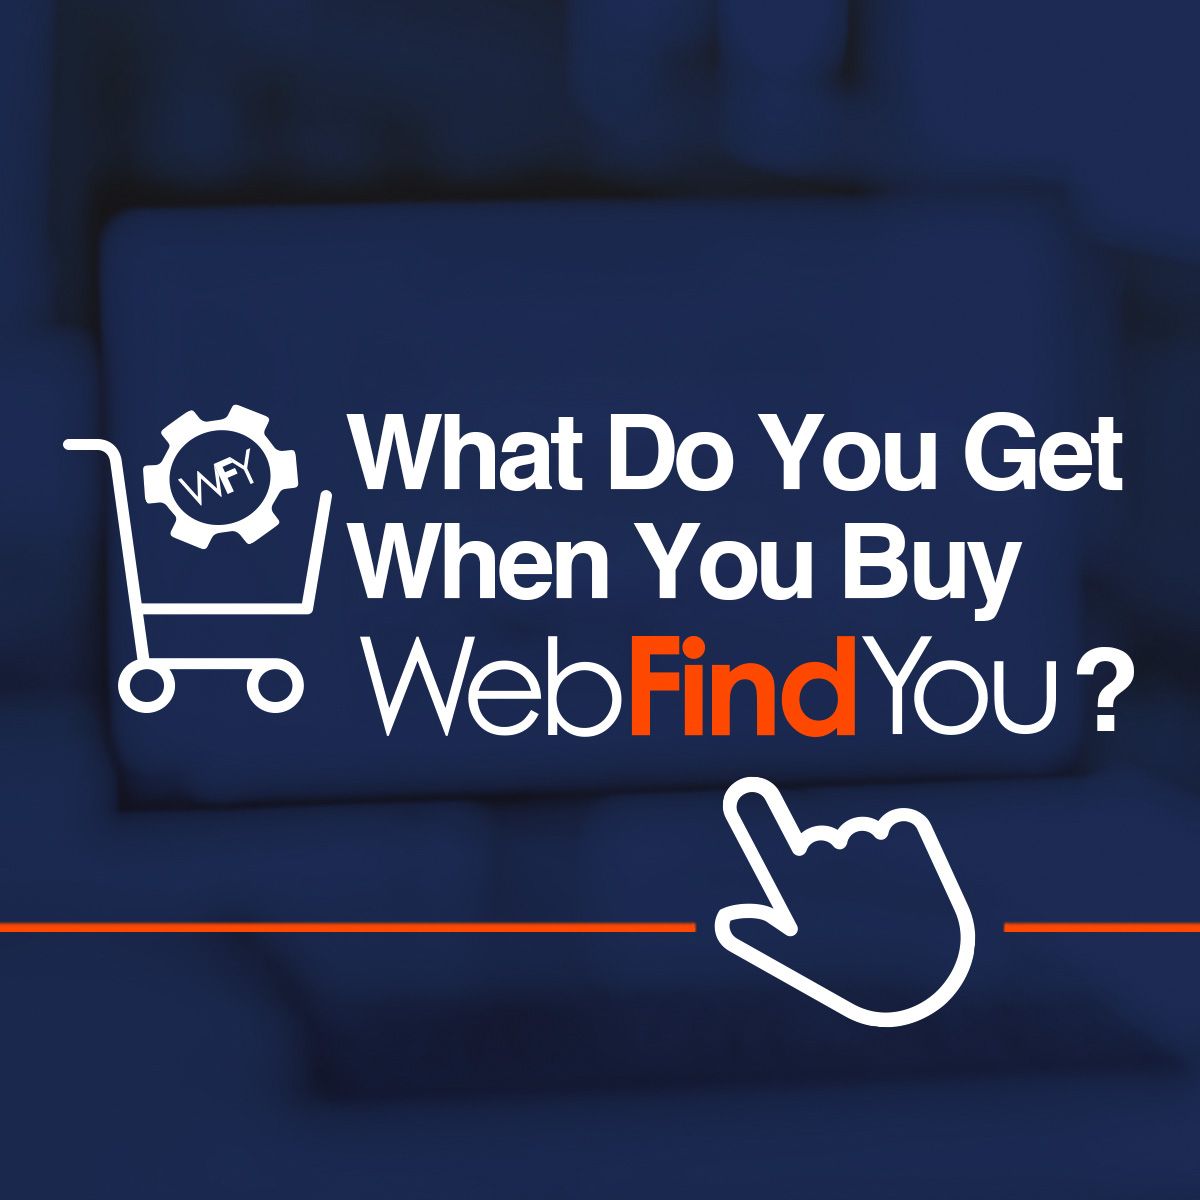 What Do You Get When You Buy WebFindYou?